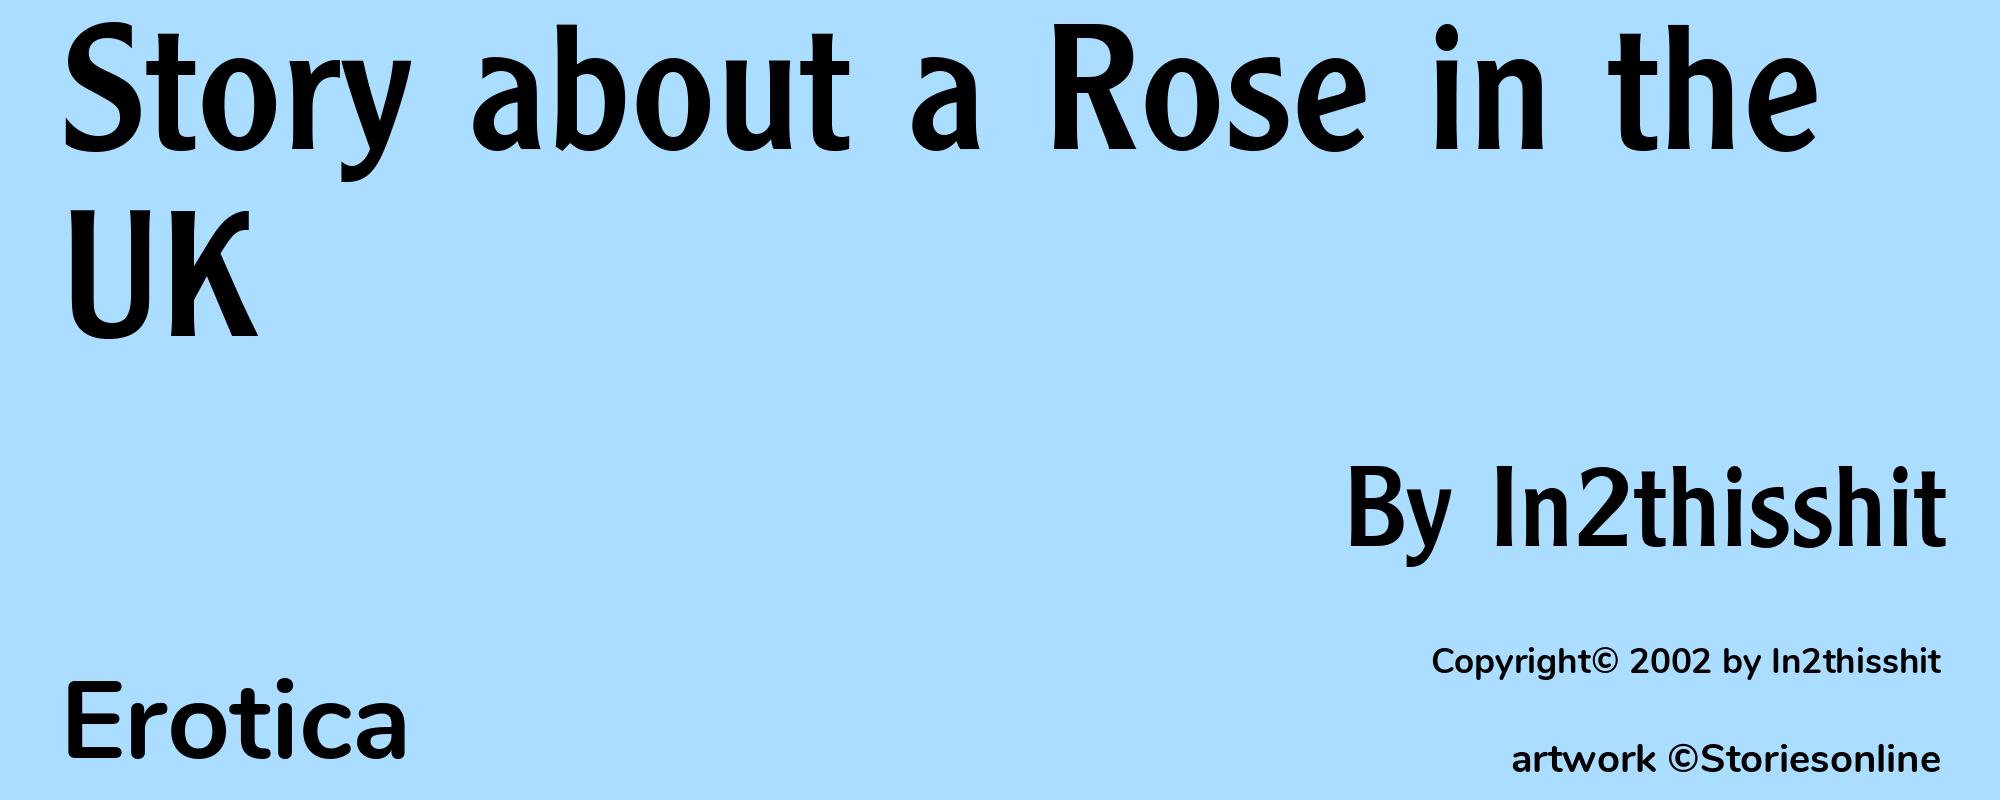 Story about a Rose in the UK - Cover